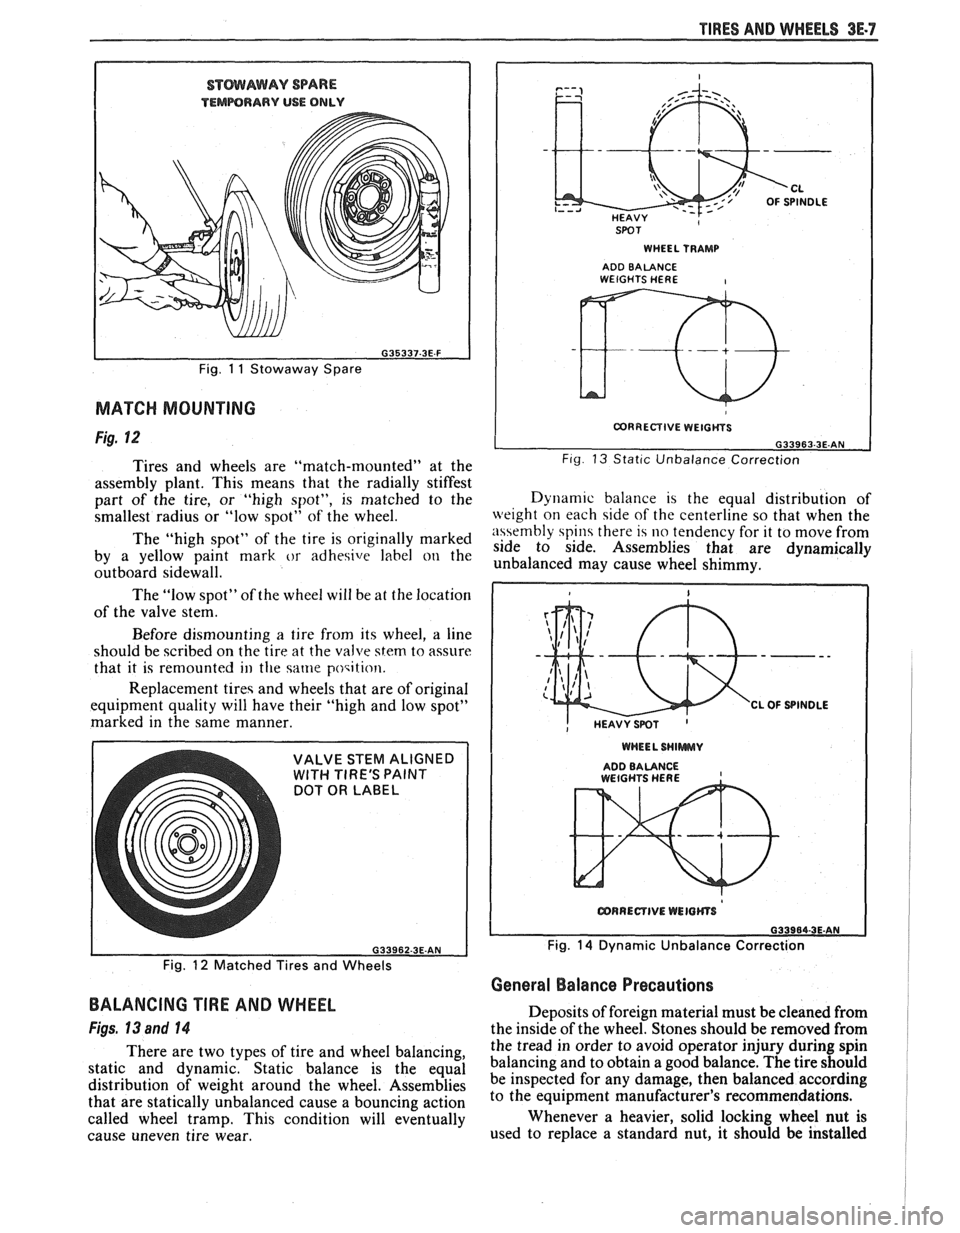 PONTIAC FIERO 1988  Service Repair Manual 
TIRES AND WHEELS 3E-7 
STMAWAY SPARE 
TEMPORARY USE ONLV 
Fig. 11 Stowaway  Spare 
MATCH MOUNTING 
Fig. 12 
Tires  and  wheels are "match-mounted"  at  the 
assembly  plant. This means  that the radi